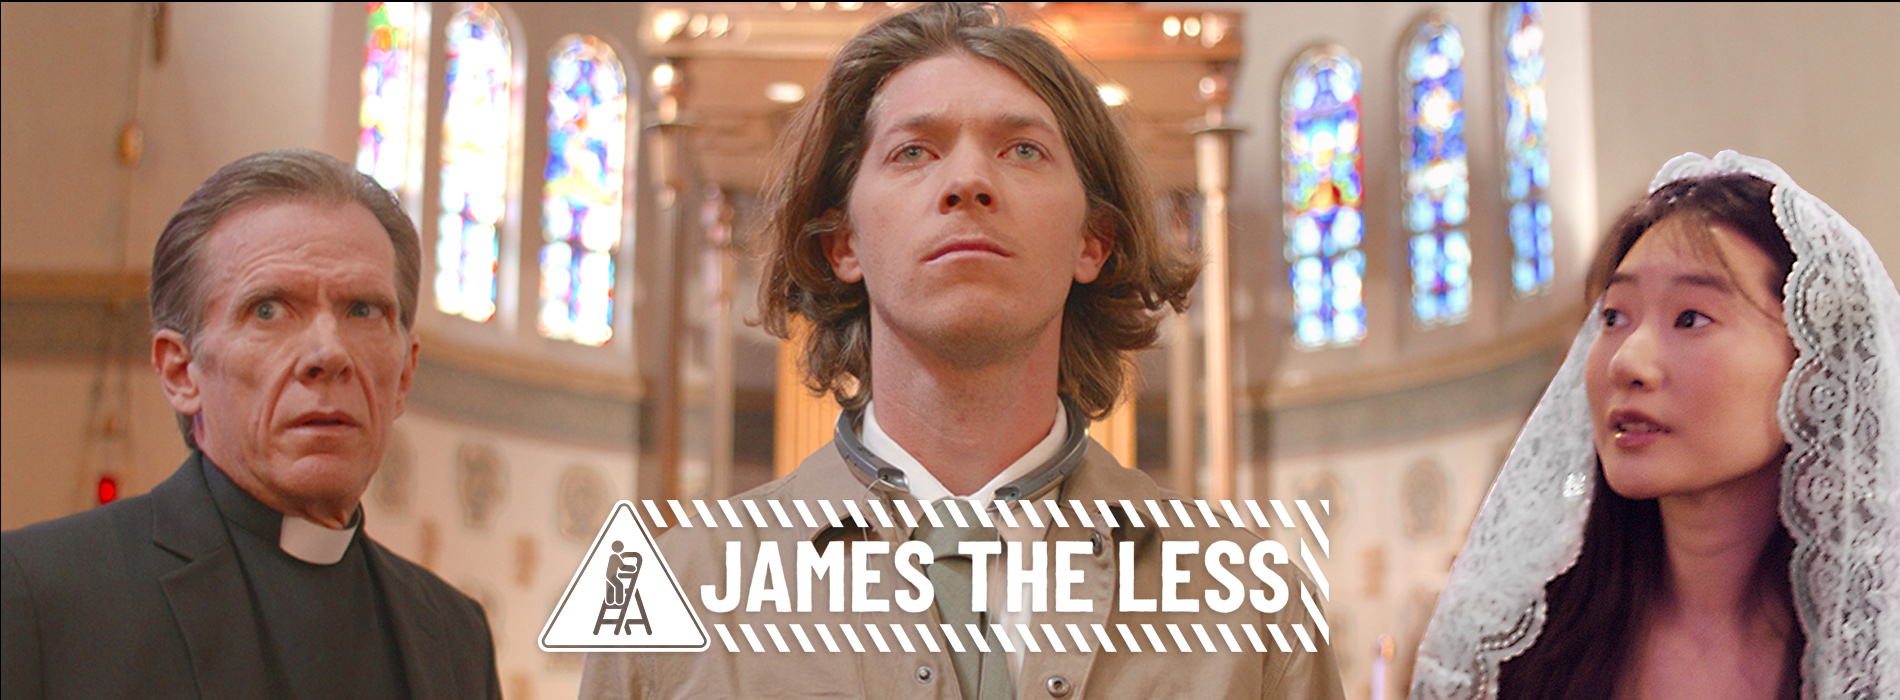 James the Less